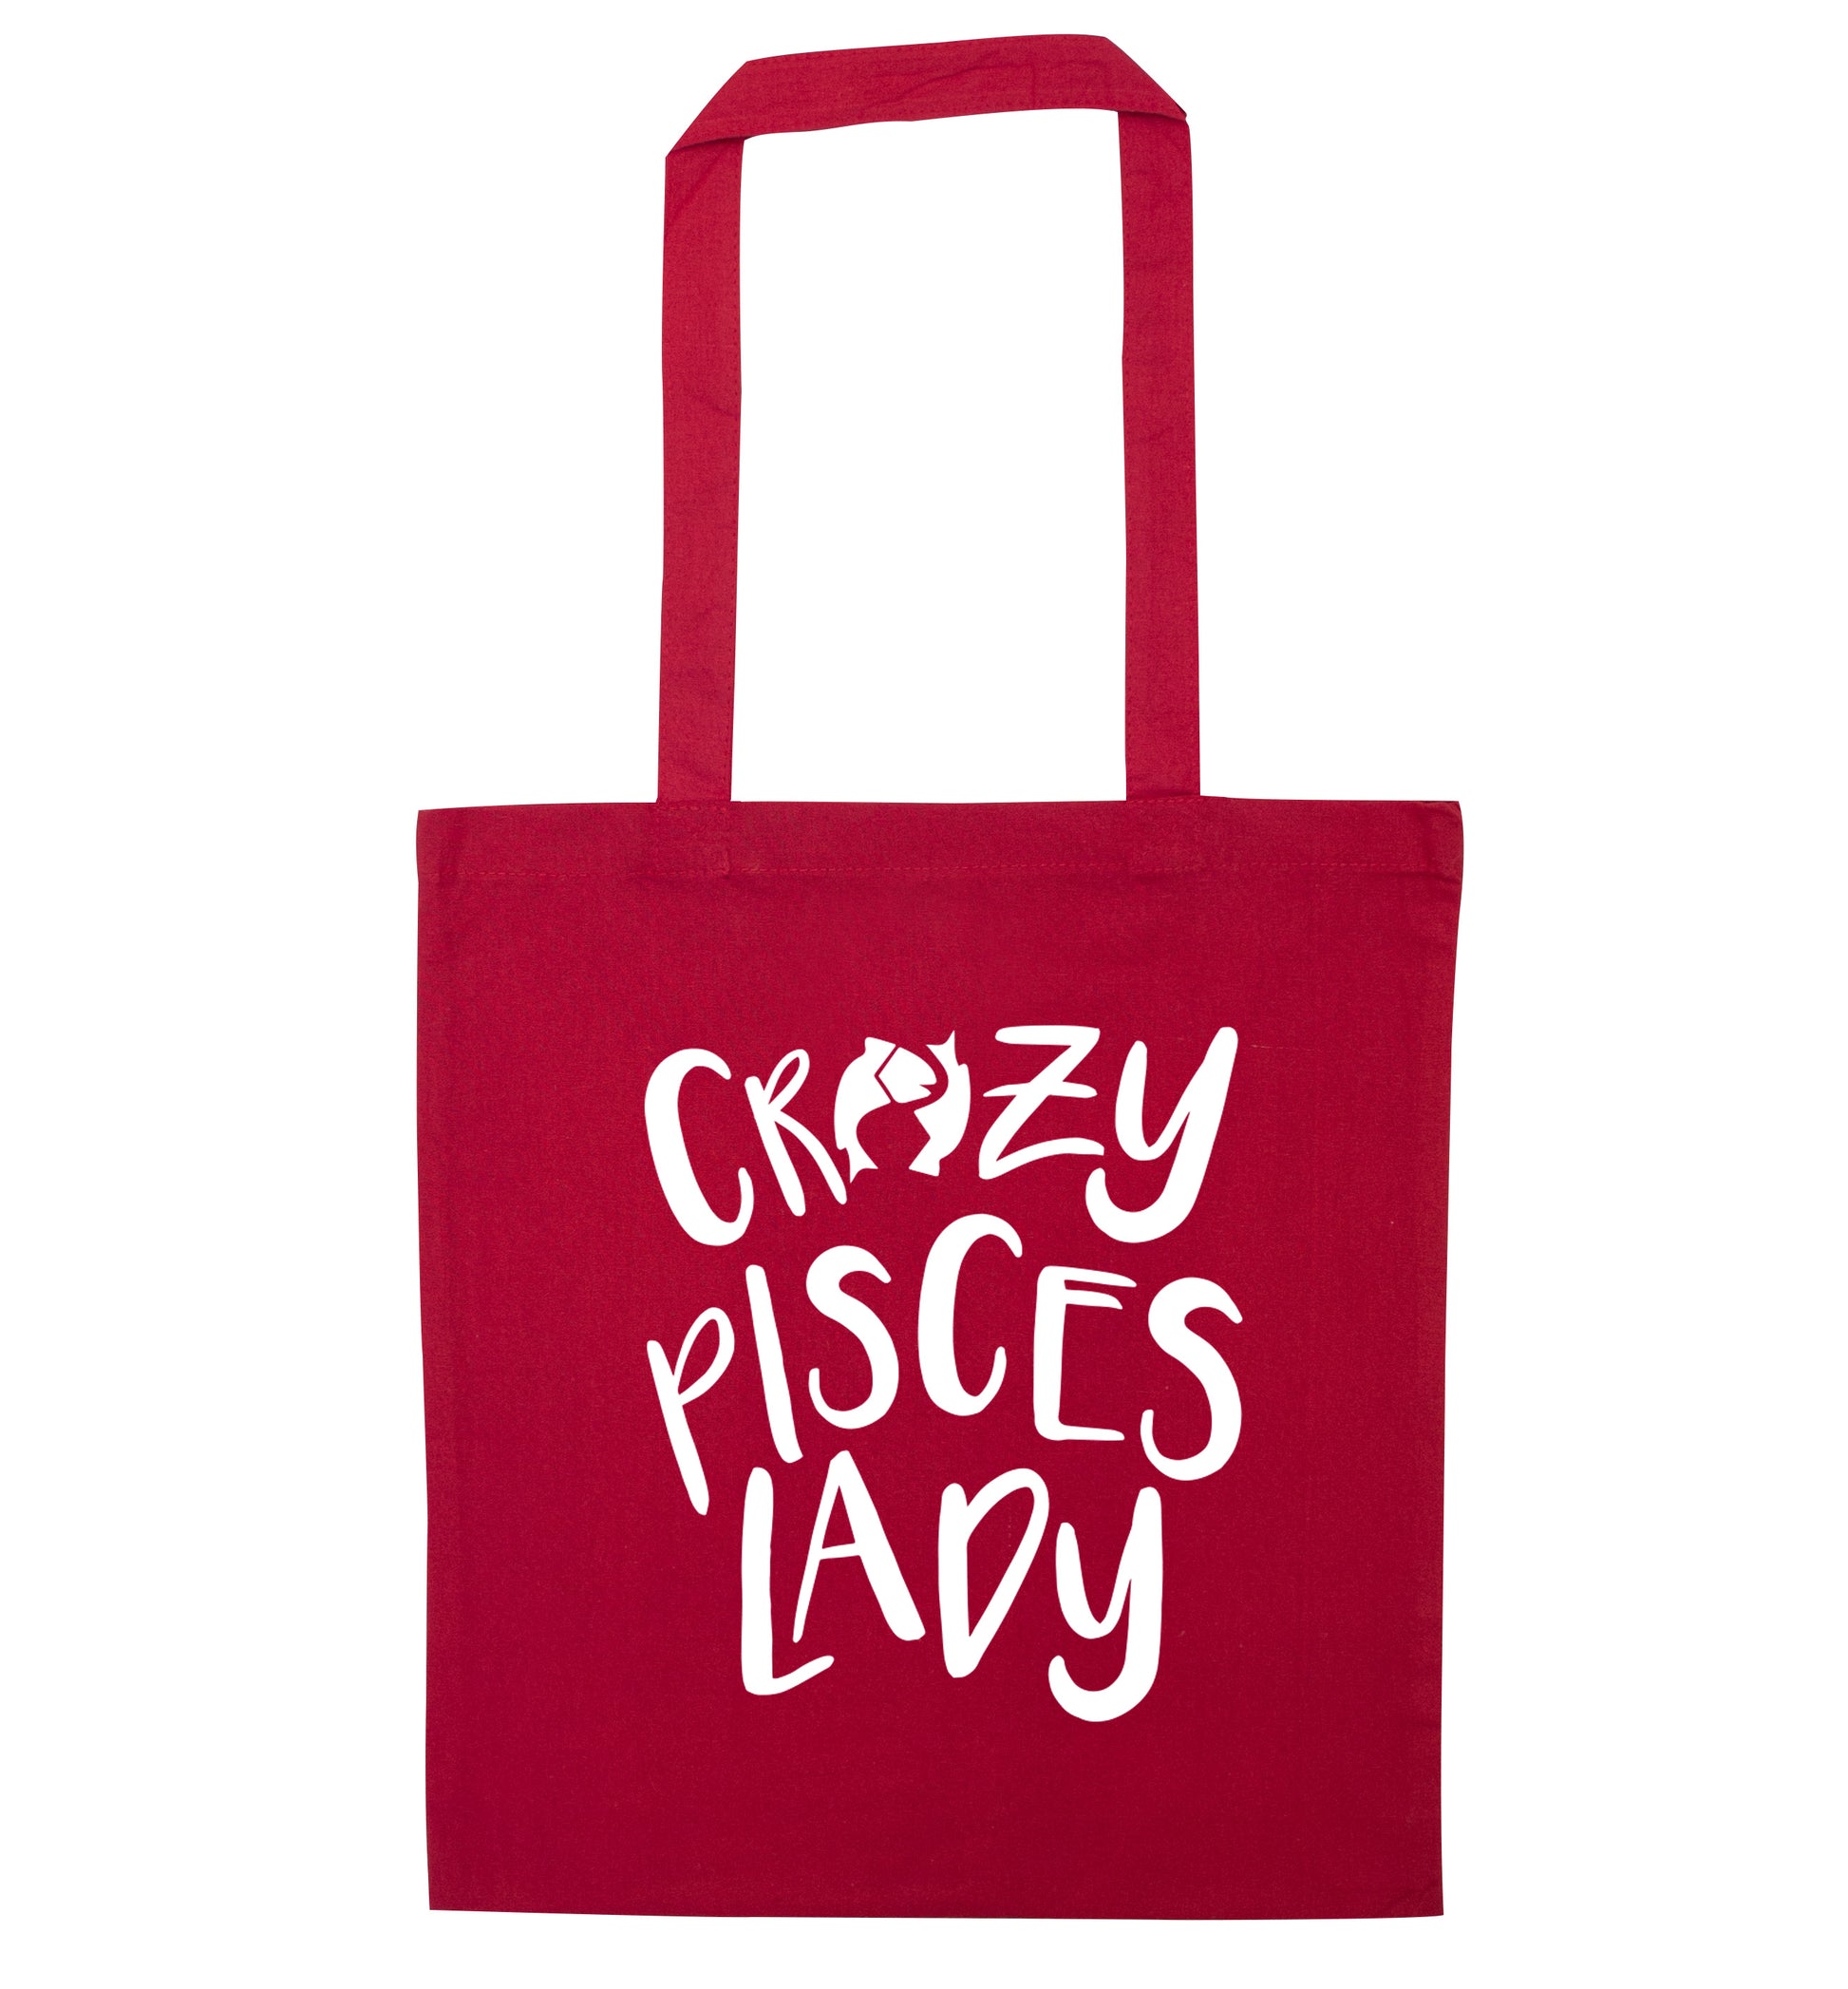 Crazy pisces Lady red tote bag